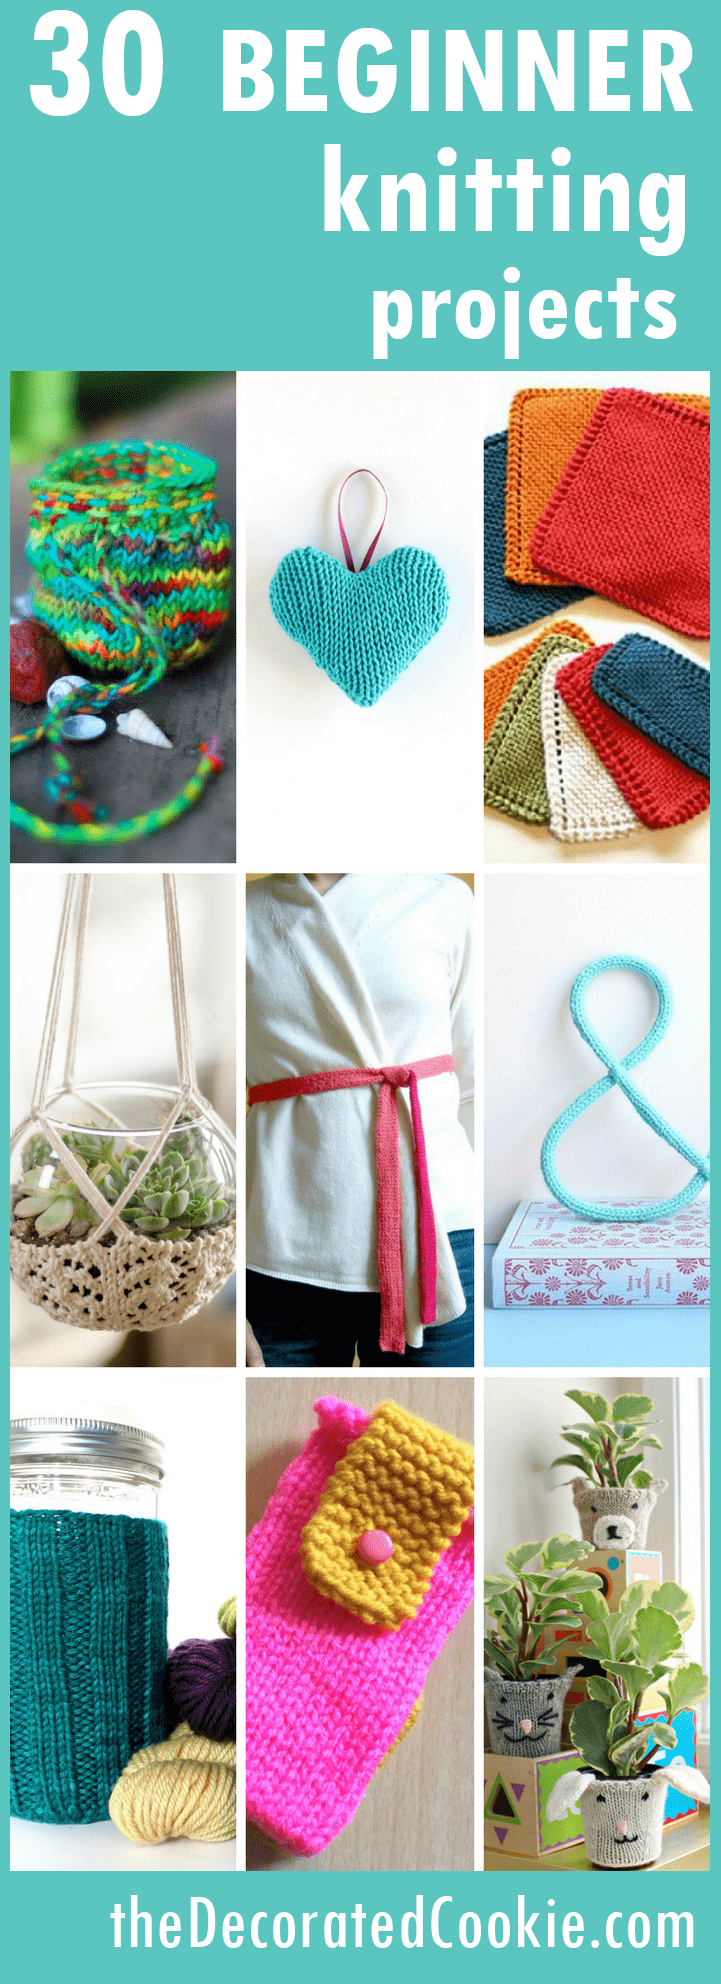 KNITTING FOR BEGINNERS: A roundup of 30 easy knitting projects